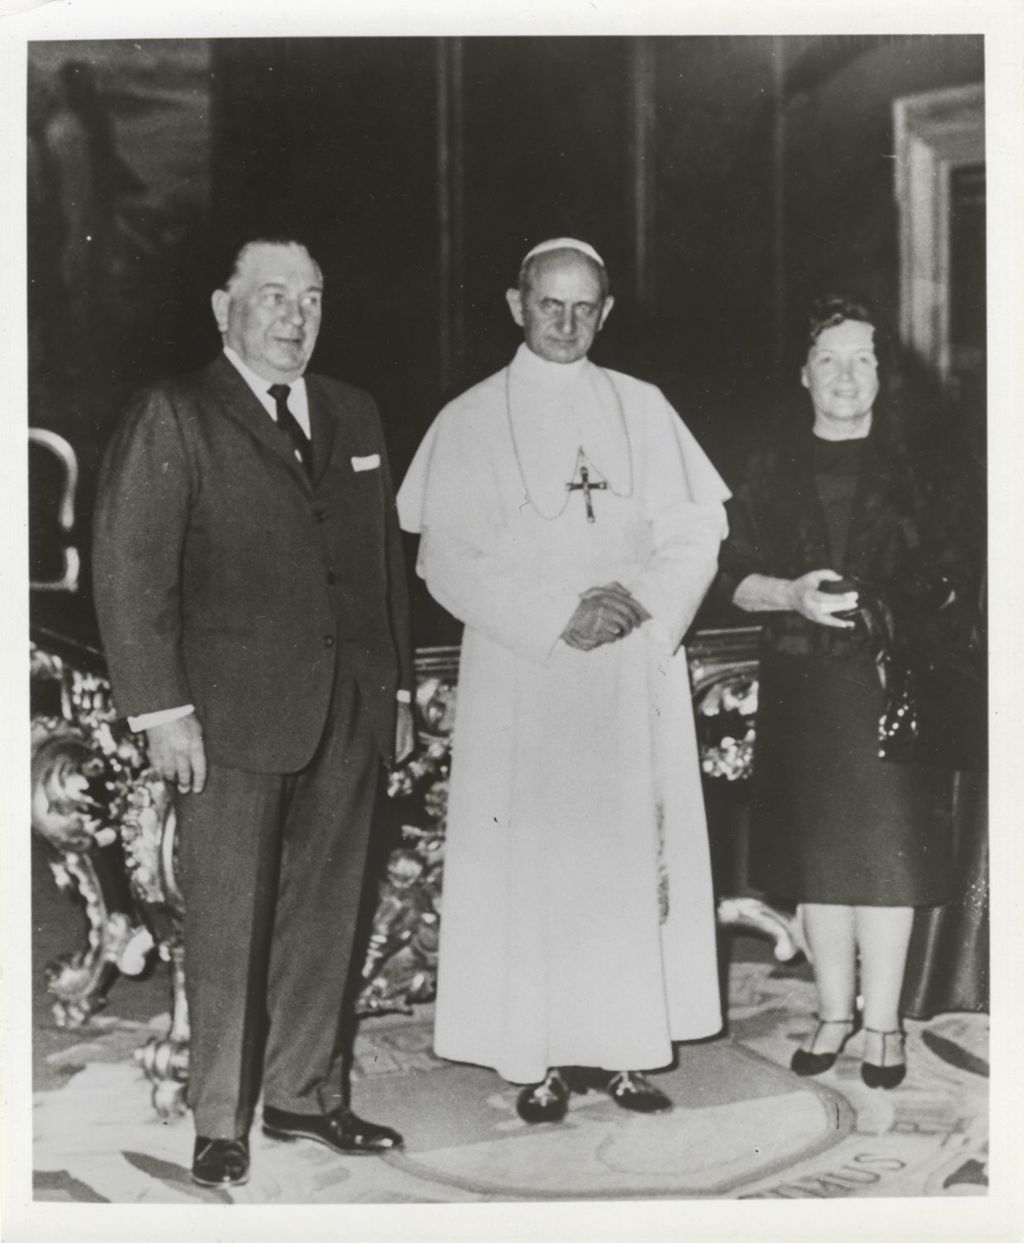 Miniature of Richard J. Daley and Eleanor Daley with Pope Paul VI